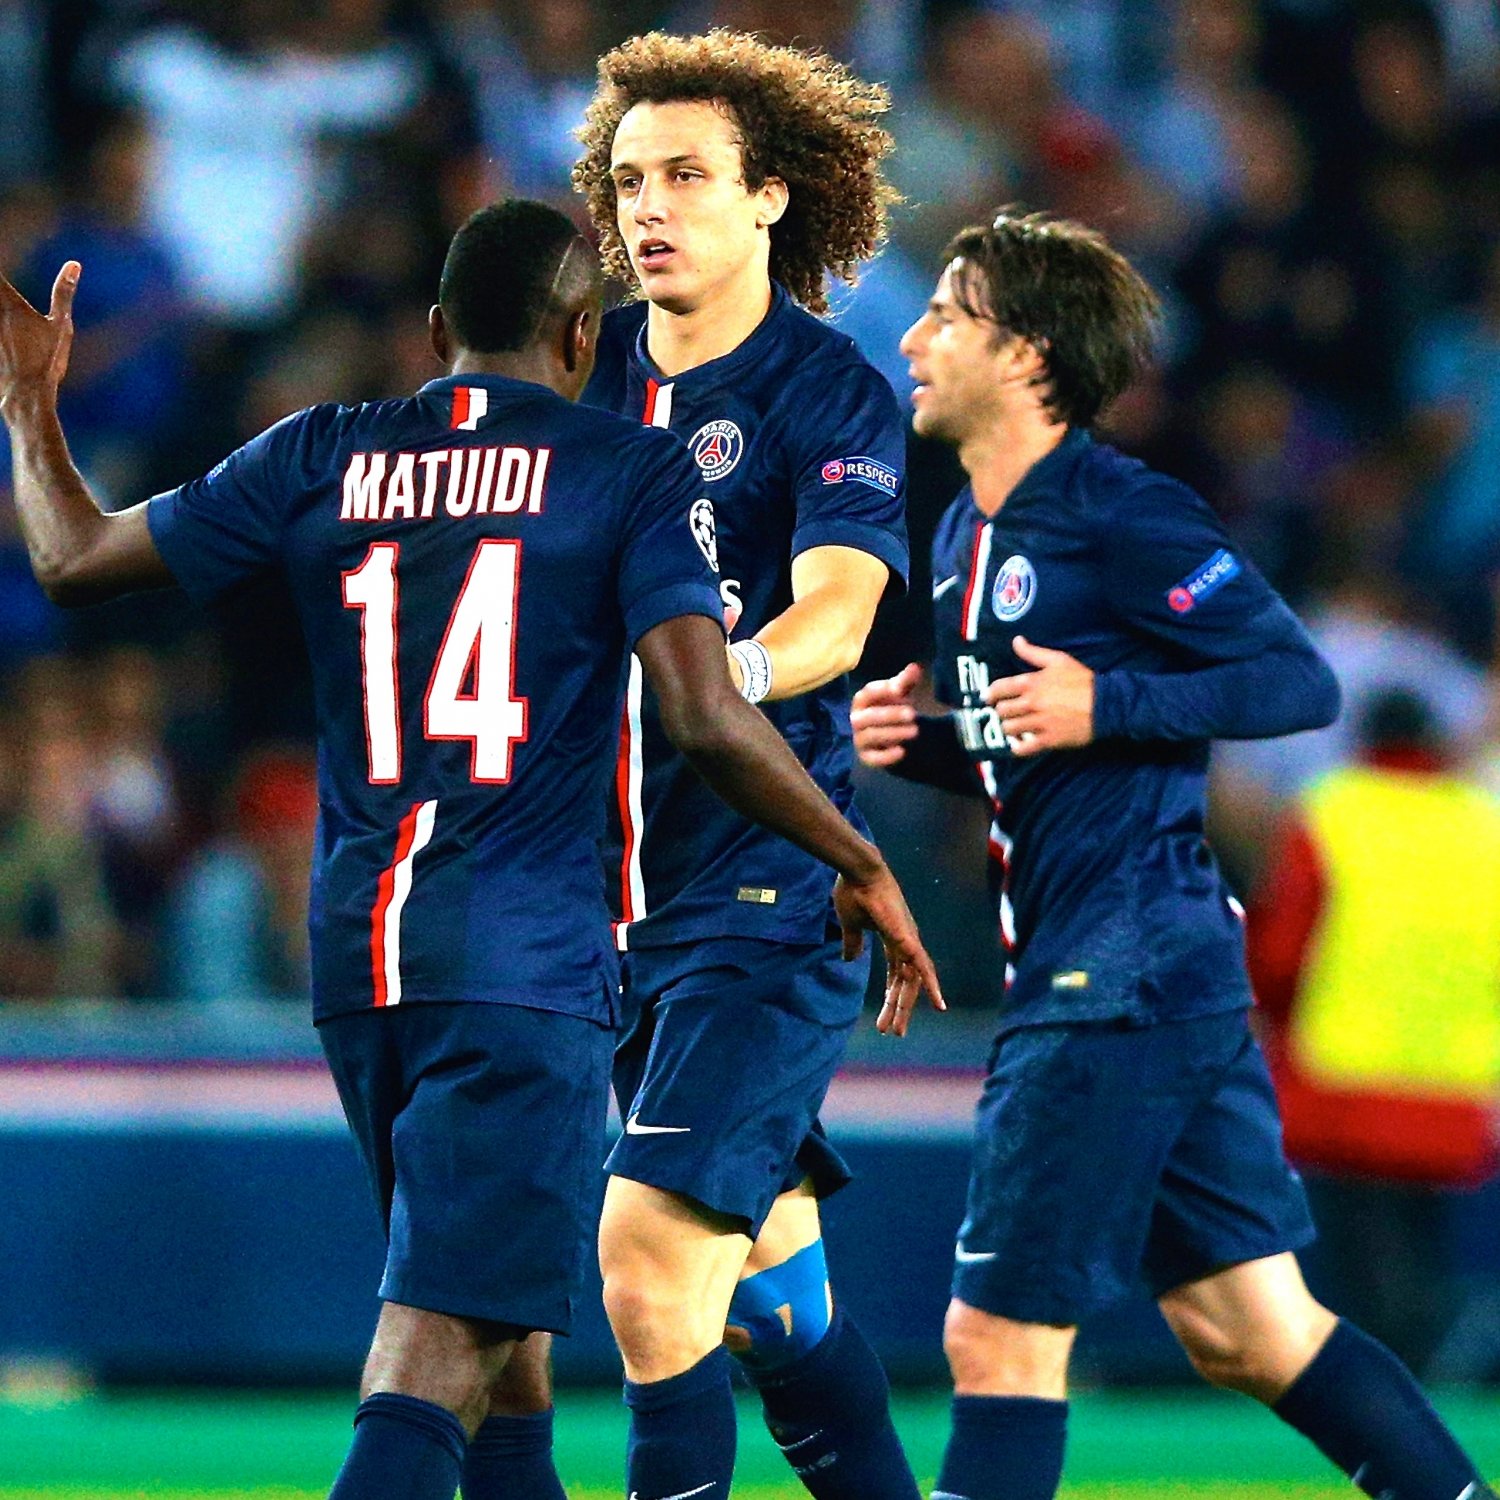 PSG vs. Barcelona Live Score, Highlights from Champions League Game